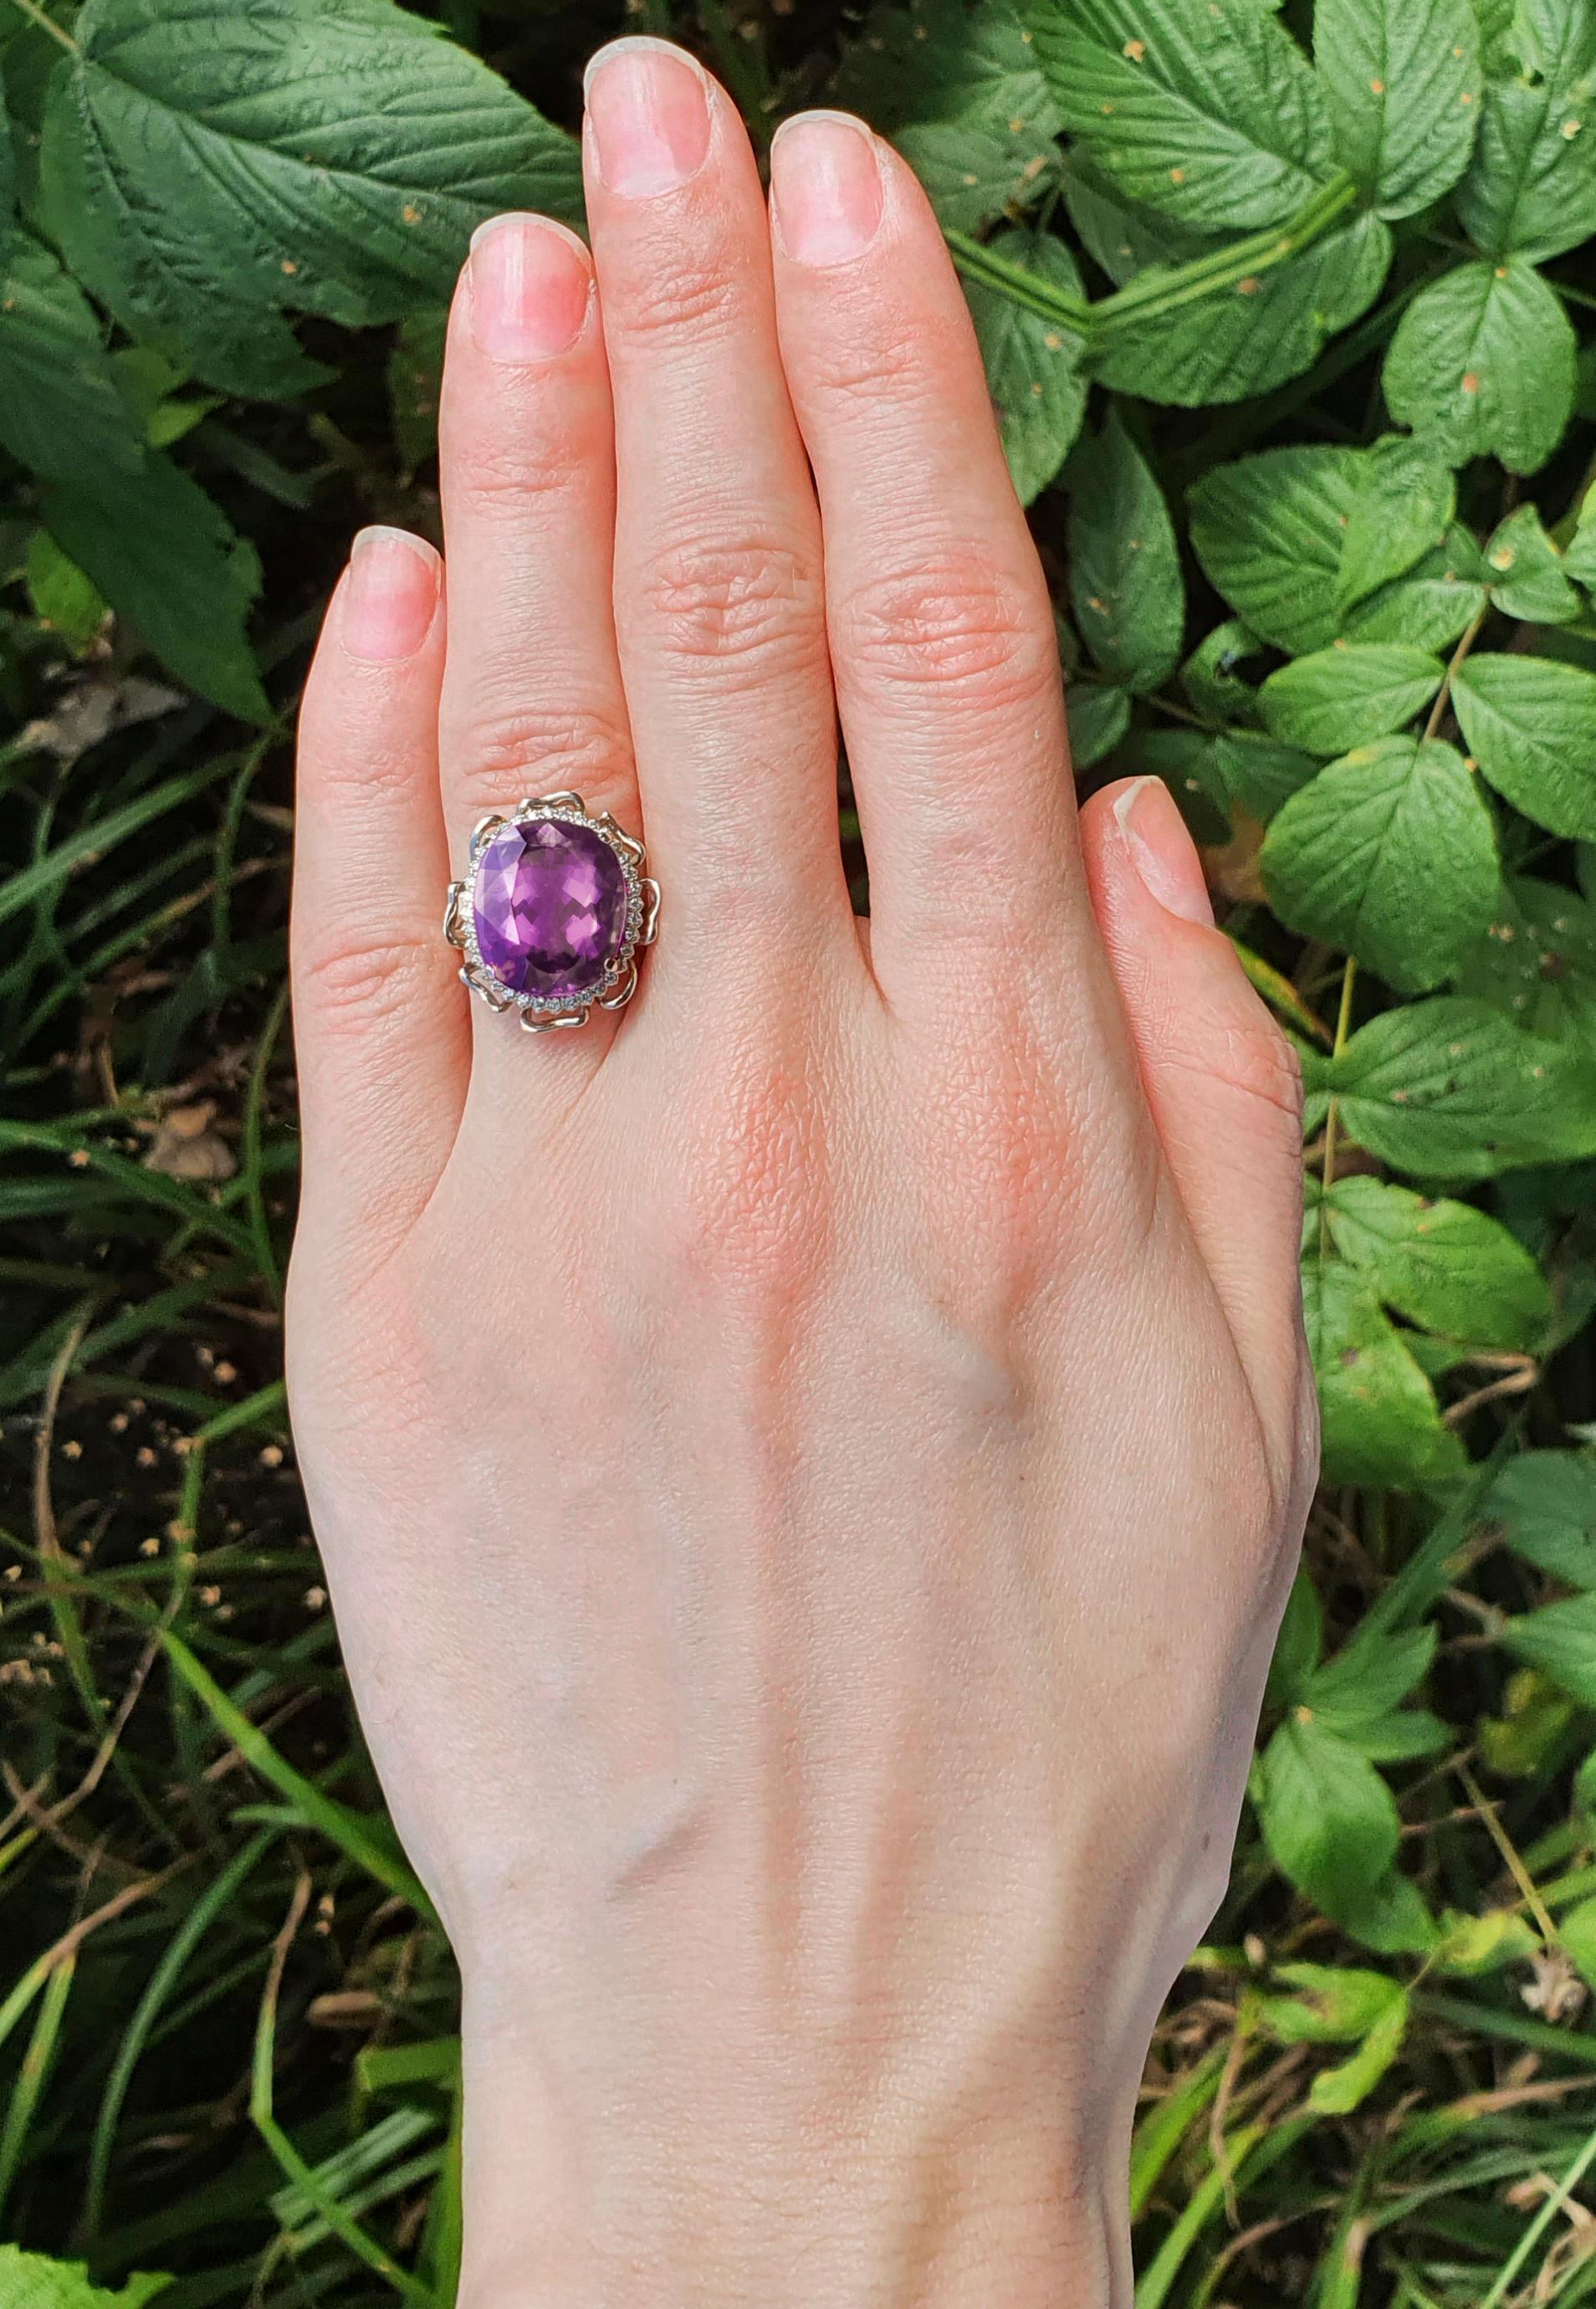 For Sale:  14 Karat Gold Flower Ring with Amethyst and Diamonds 5